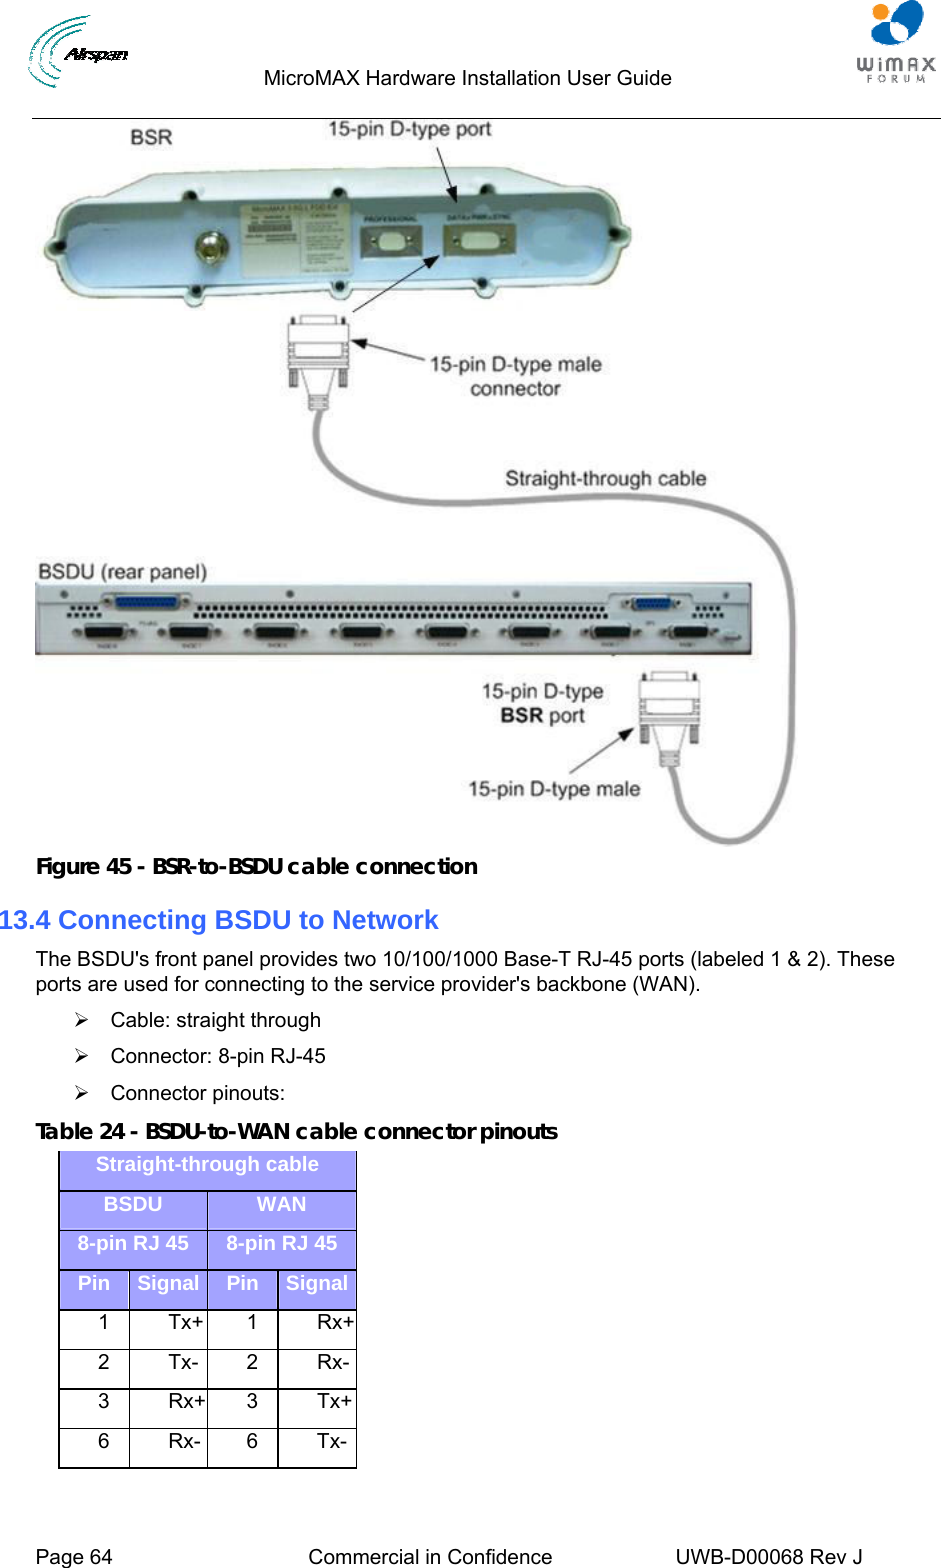                                  MicroMAX Hardware Installation User Guide     Page 64  Commercial in Confidence  UWB-D00068 Rev J    Figure 45 - BSR-to-BSDU cable connection 13.4 Connecting BSDU to Network The BSDU&apos;s front panel provides two 10/100/1000 Base-T RJ-45 ports (labeled 1 &amp; 2). These ports are used for connecting to the service provider&apos;s backbone (WAN). ¾  Cable: straight through ¾  Connector: 8-pin RJ-45 ¾ Connector pinouts: Table 24 - BSDU-to-WAN cable connector pinouts Straight-through cable BSDU  WAN 8-pin RJ 45  8-pin RJ 45 Pin  Signal  Pin  Signal 1 Tx+ 1 Rx+ 2 Tx- 2 Rx- 3 Rx+ 3 Tx+ 6 Rx- 6 Tx-  